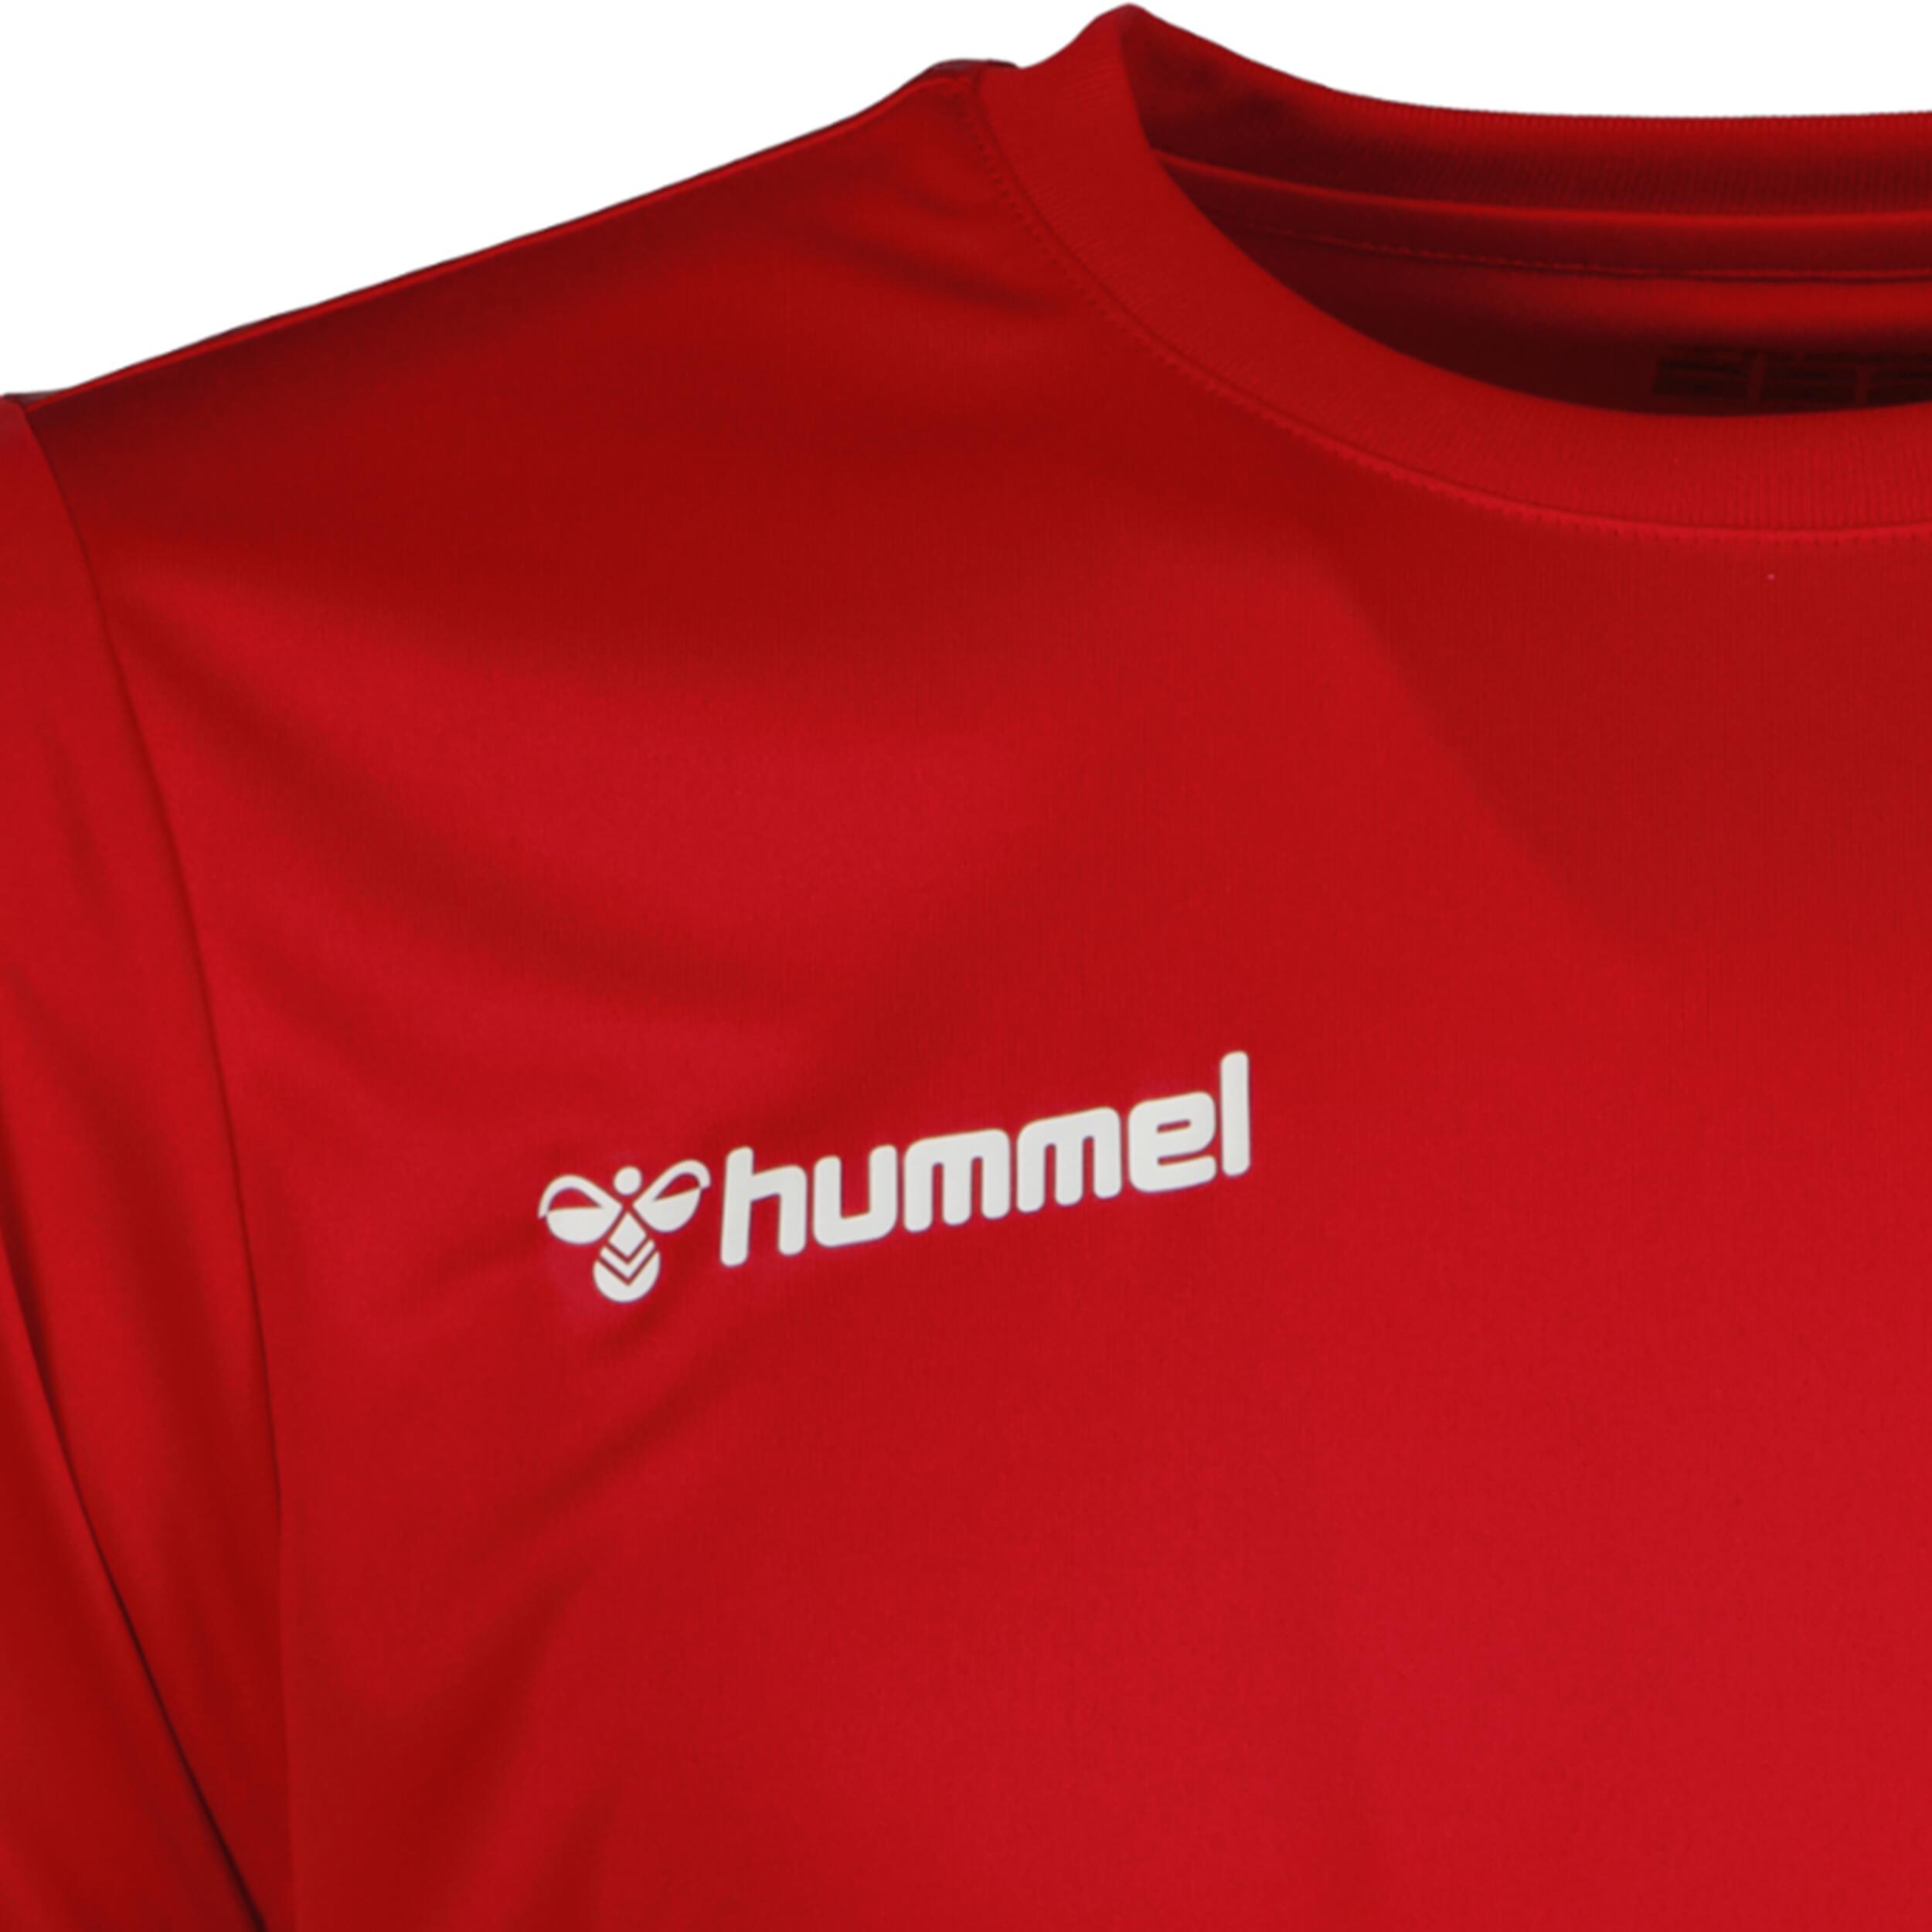 Solo jersey for men, great for football, in true red 3/3